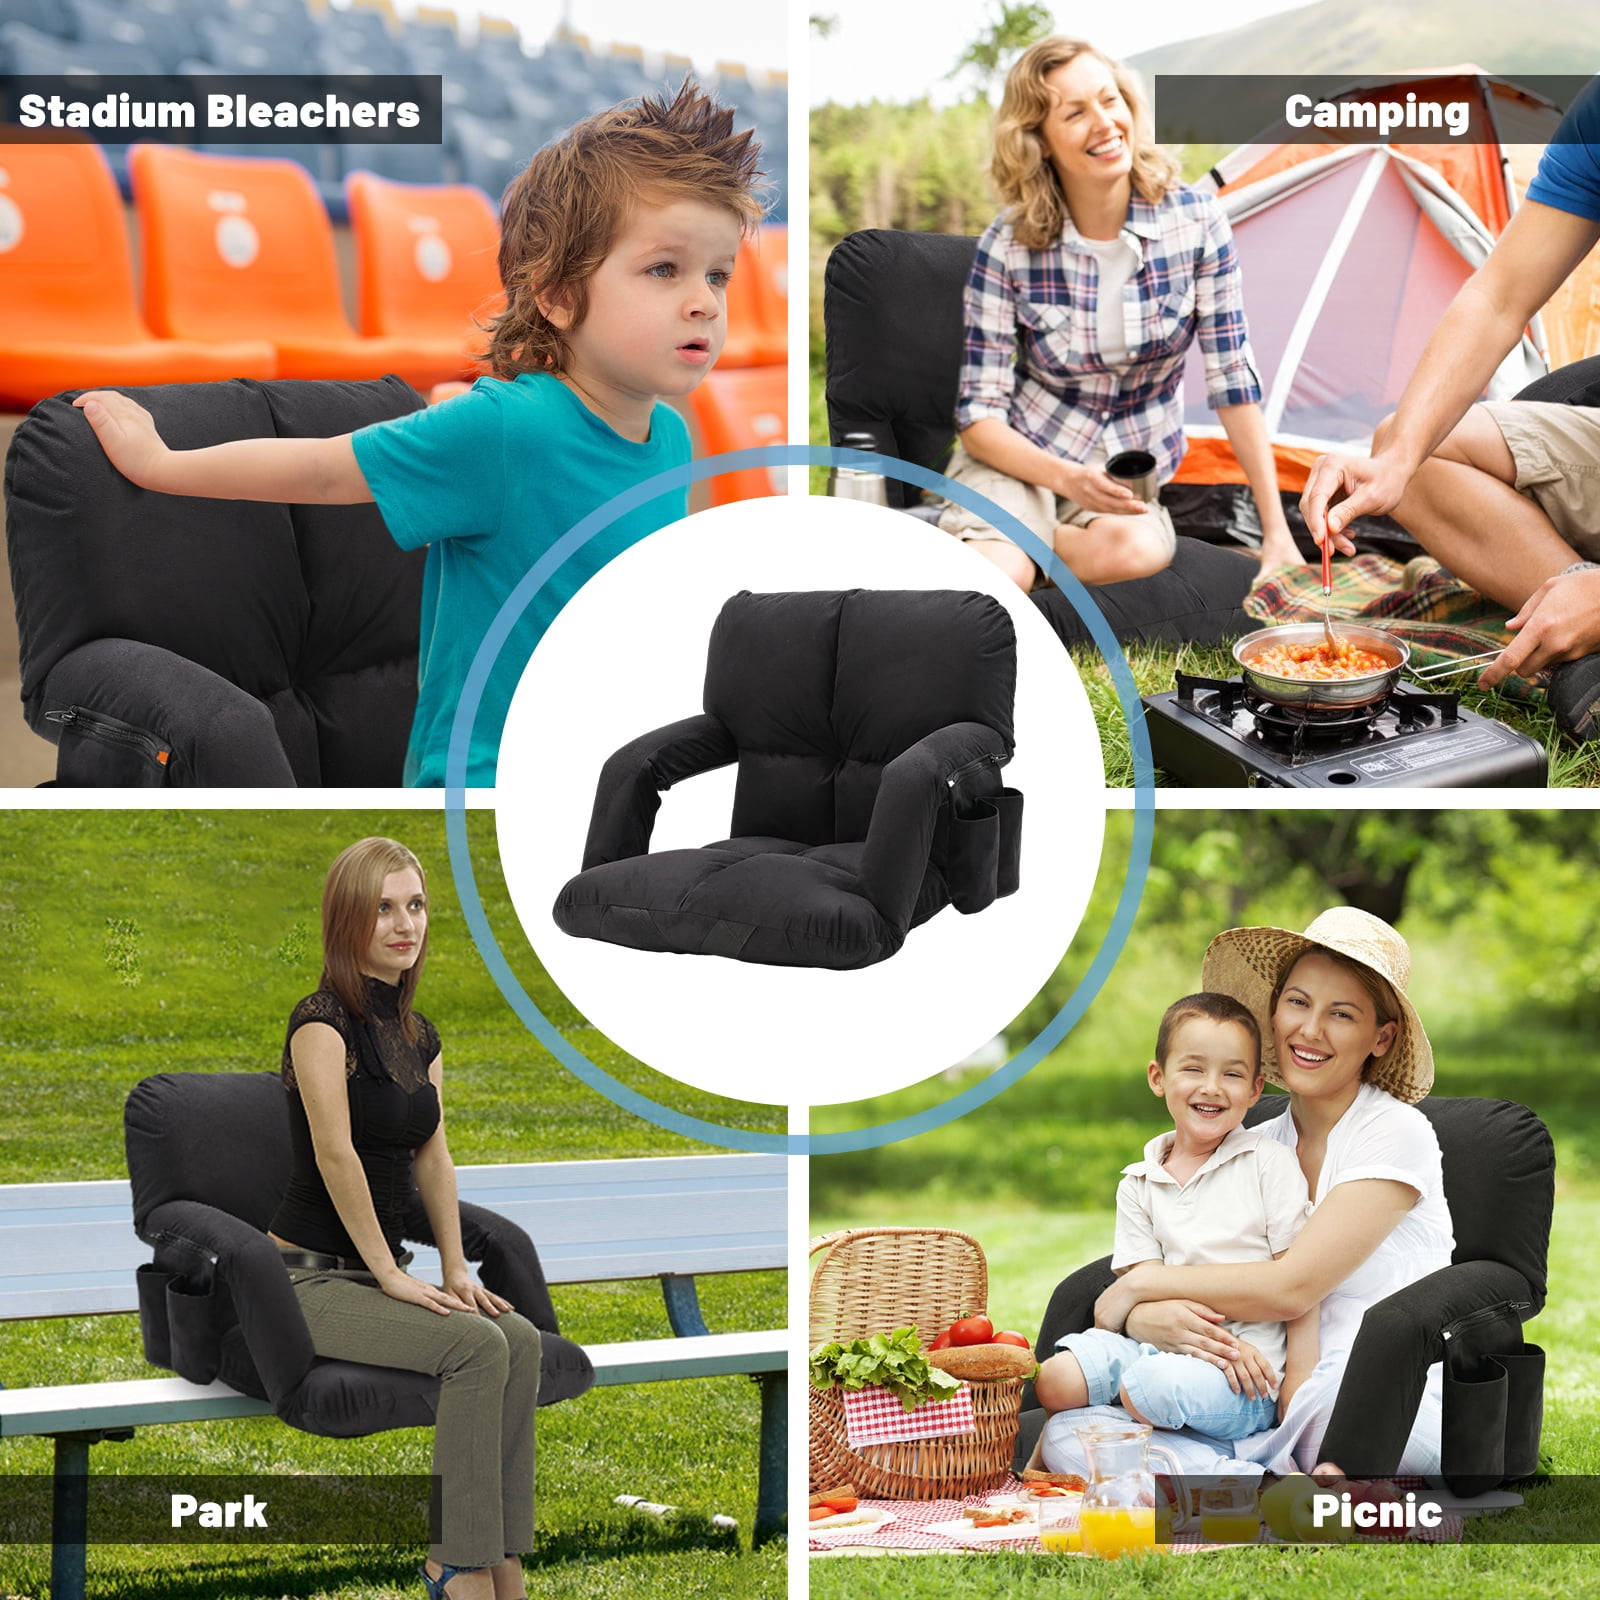 KWQBHW Portable Stadium Seat Cushion Foldable Stadium Seats Lightweight  Padded Seat with Backrest for Bleachers Indoor Outdoor Sports Camping